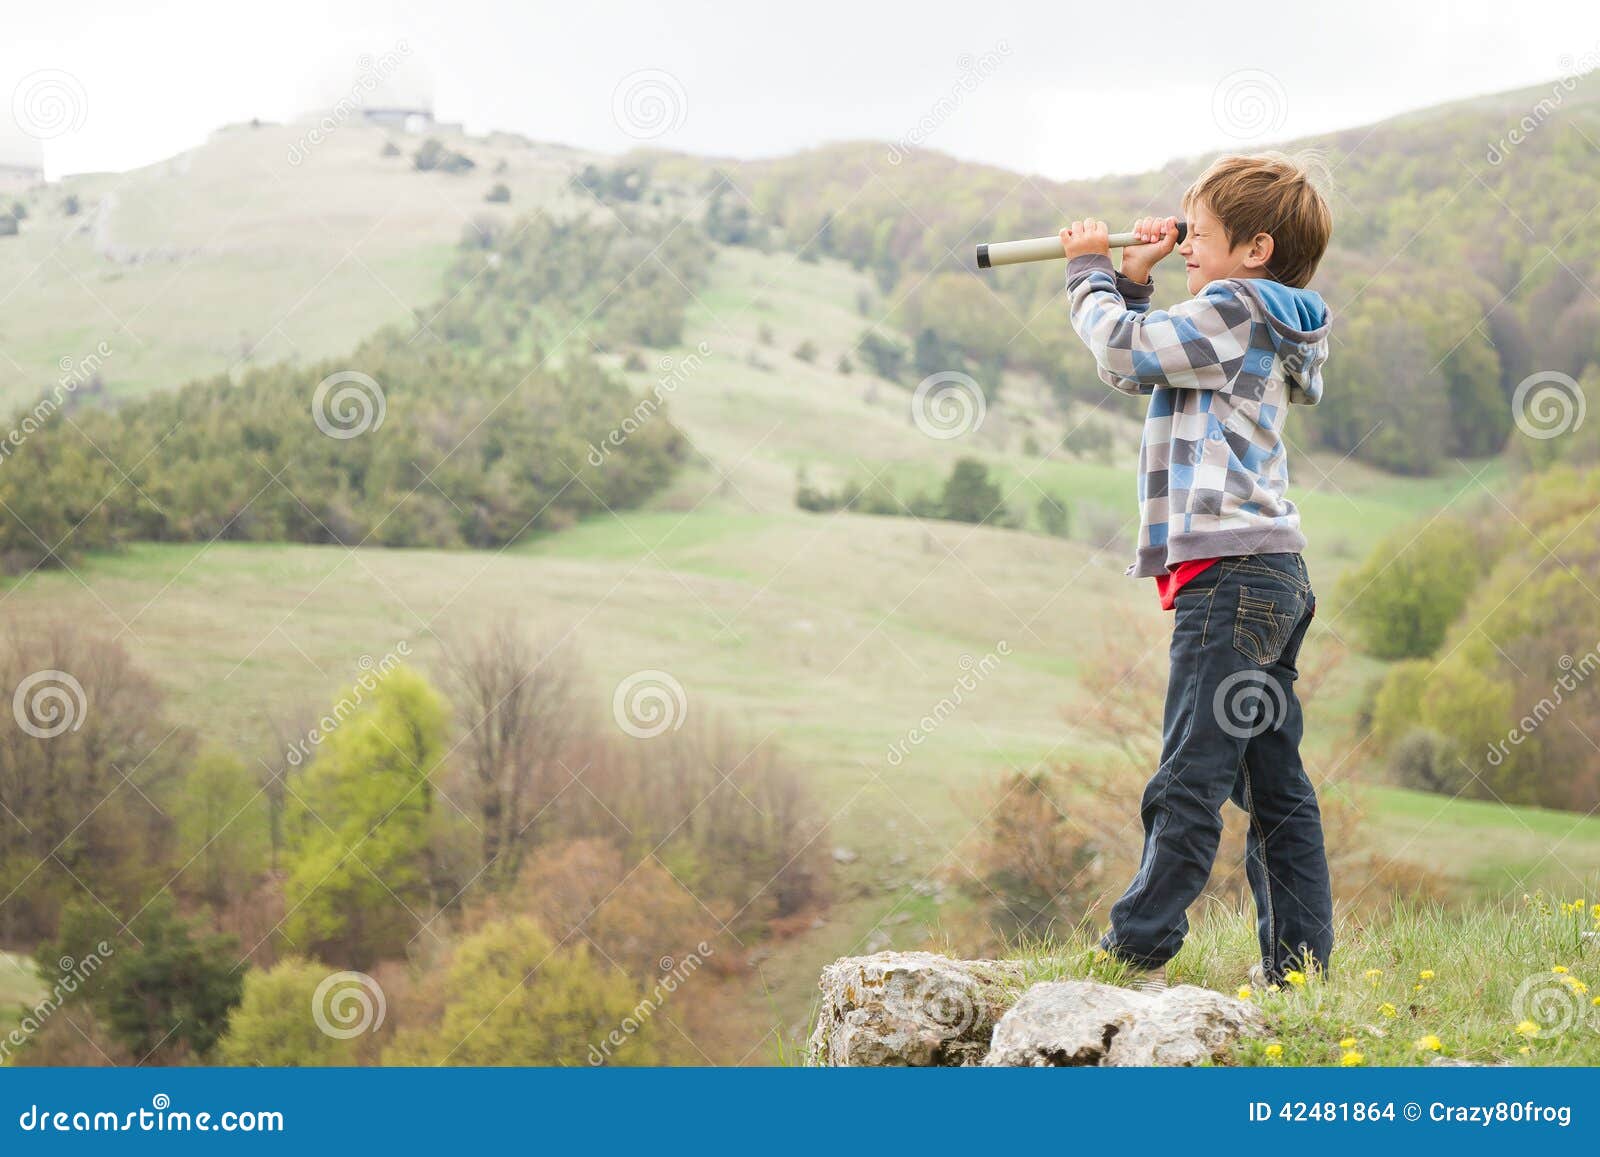 Baby Boy Joyful Laughing & Playing in Country Meadow Stock Image